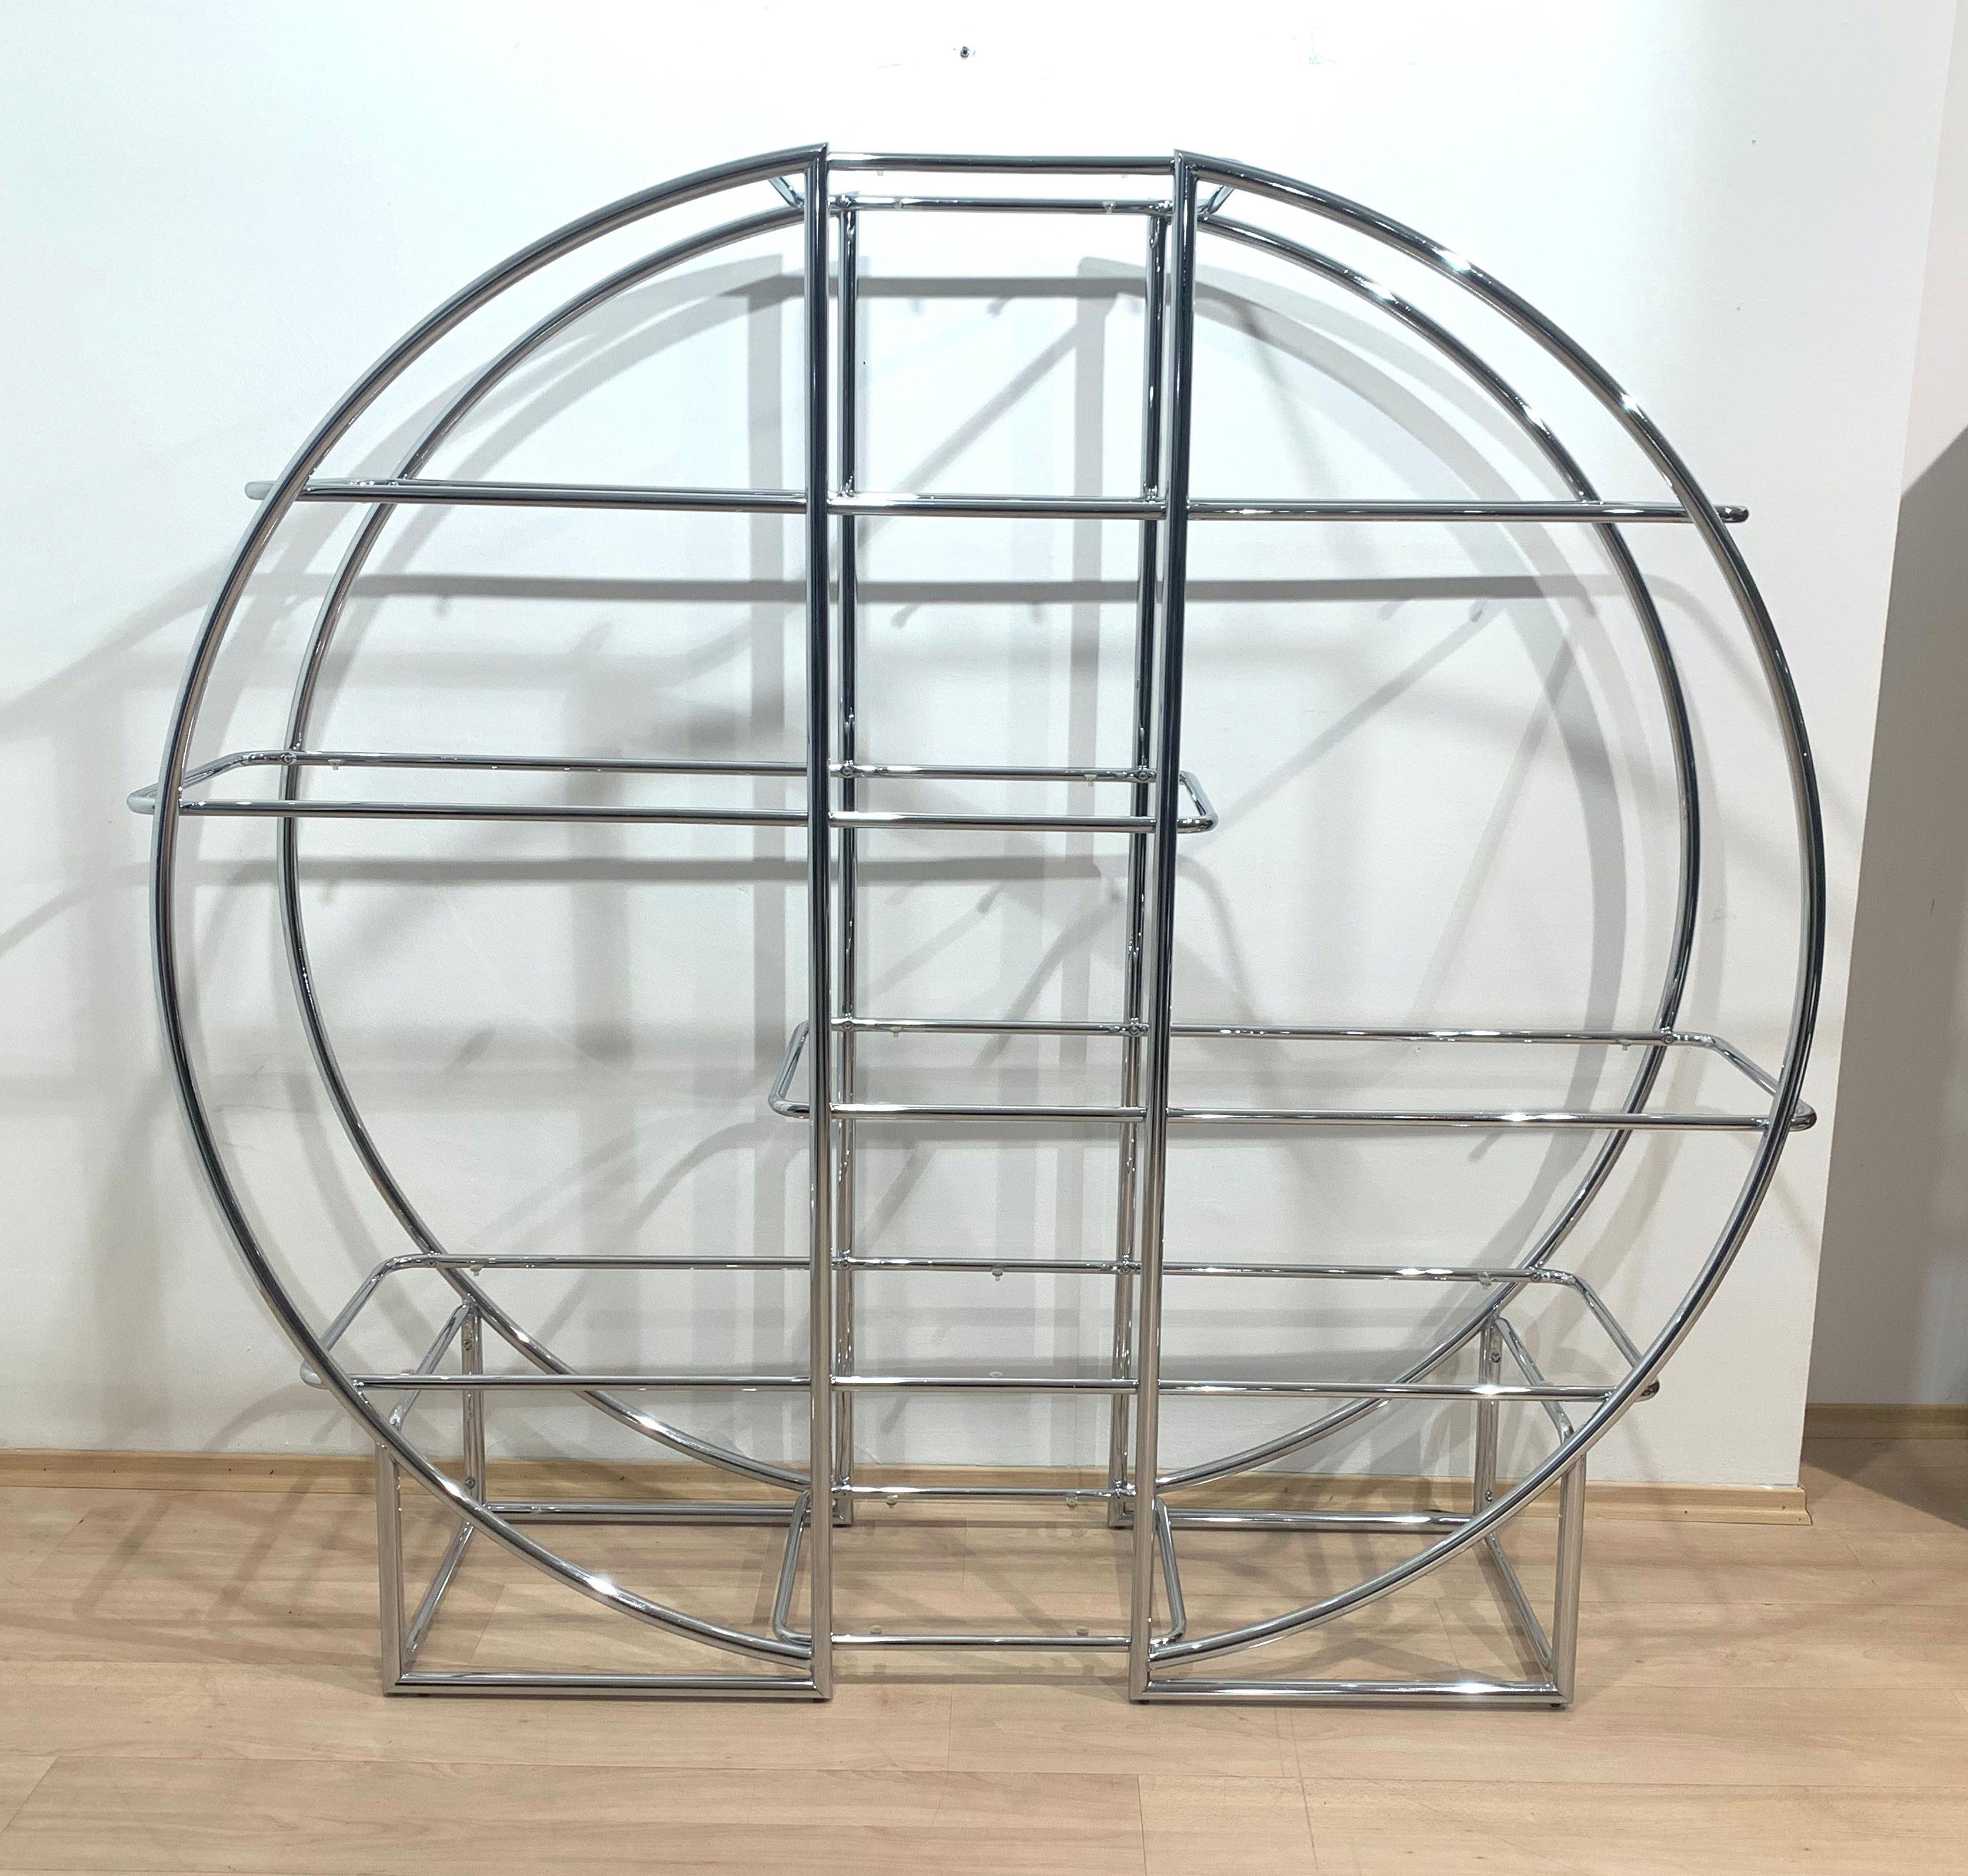 Bauhaus Style Shelf, Chromed Steeltubes and Glass, Germany, 1950-70s For Sale 10